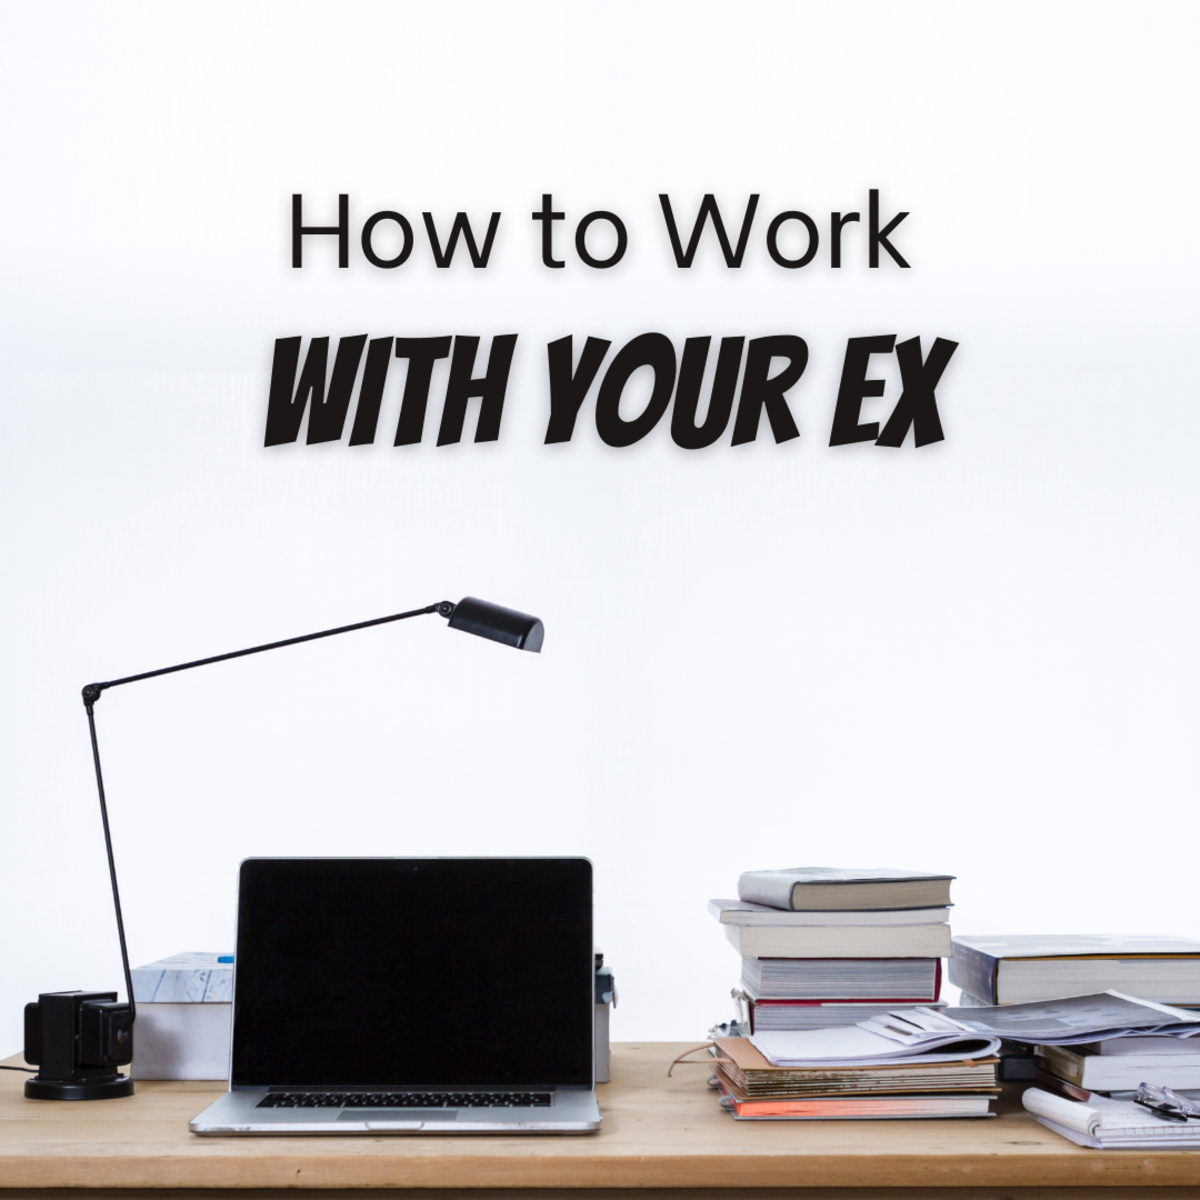 Working With an Ex: How to Work With an Ex-Girlfriend or Ex-Boyfriend